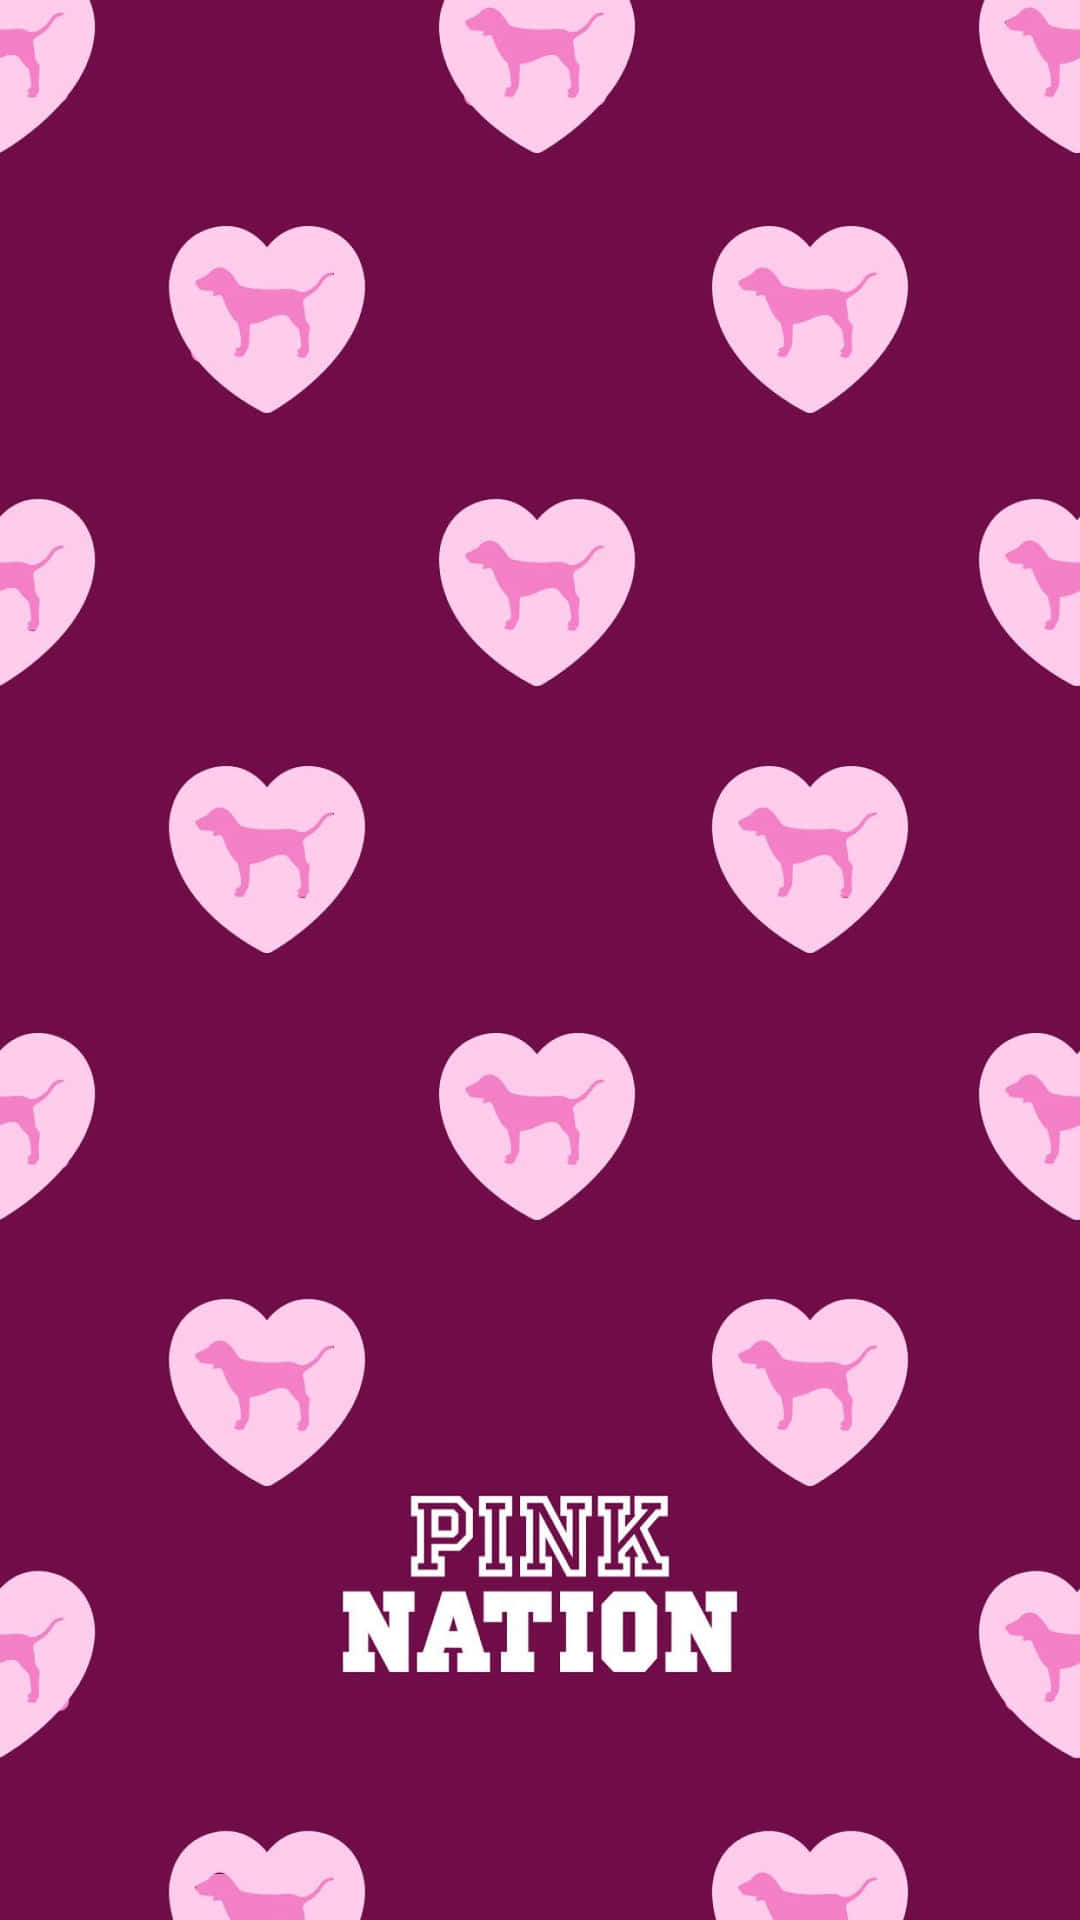 Pink Nation Logo With Hearts And Dogs Icons Wallpaper